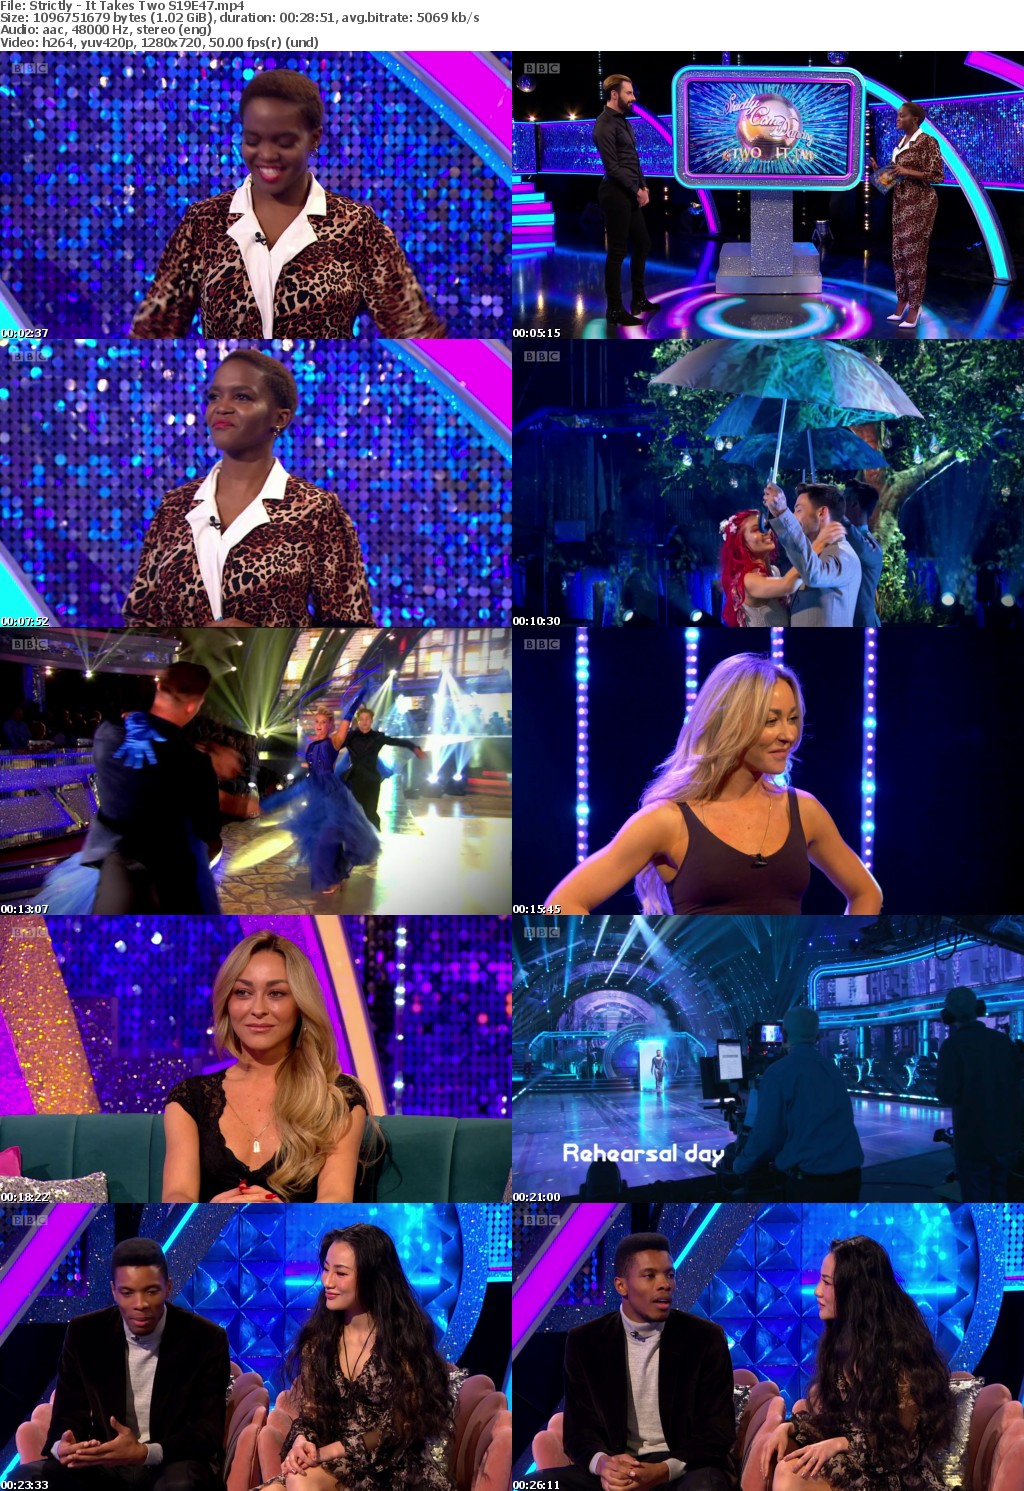 Strictly - It Takes Two S19E47 (1280x720p HD, 50fps, soft Eng subs)